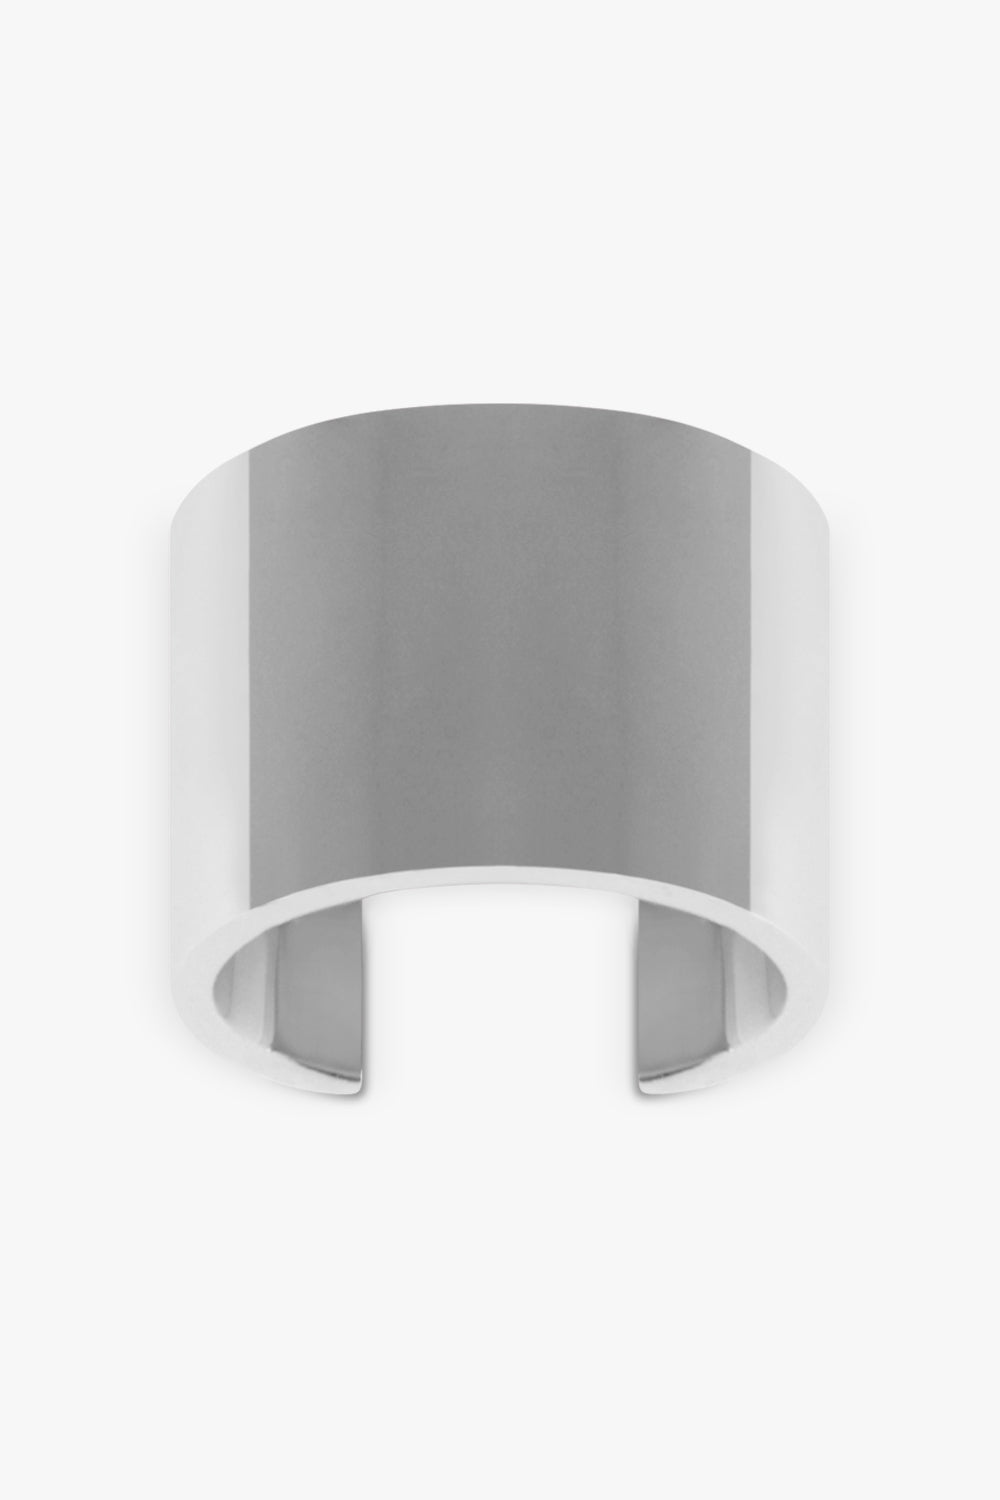 SENER BESIM JEWELLERY Linear Solid Band Ring | Silver